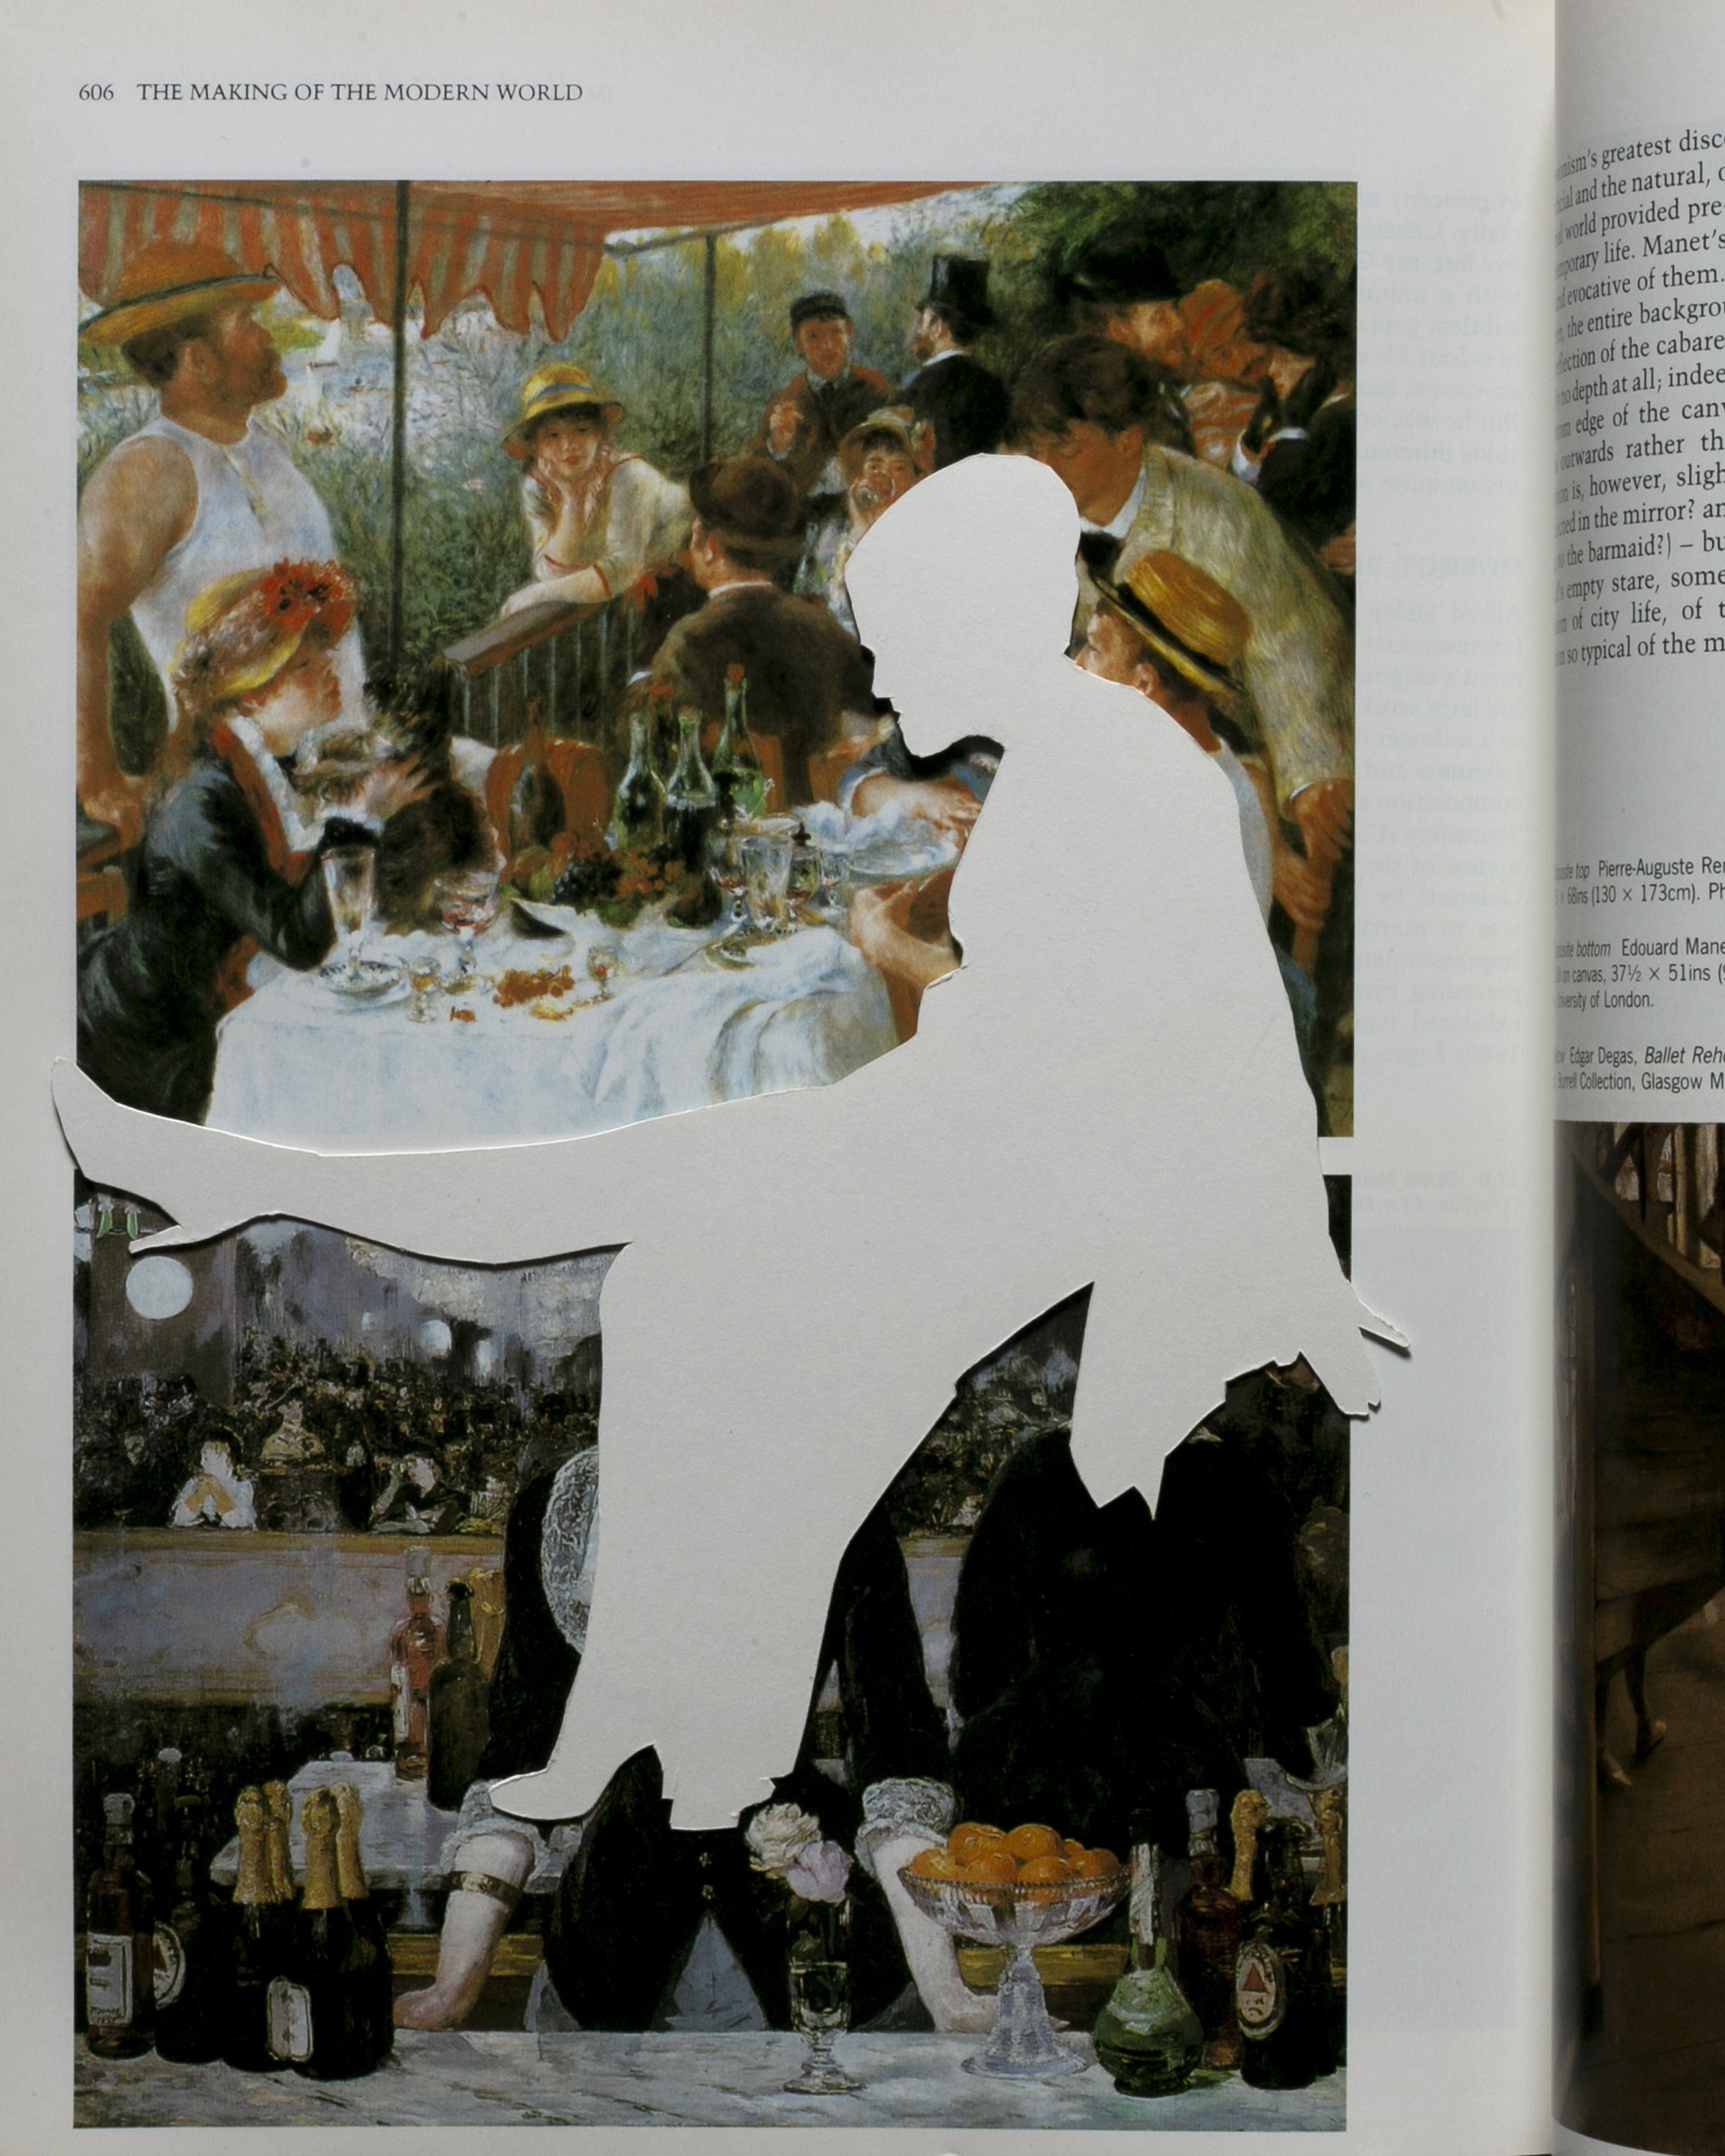 White, silhouetted figure of a seated woman, one leg stretched out in front of her, simperimposed on a page of an art history book that shows both Renoir's "Luncheon of the Boating Party" and Manet's "Bar at the Folies Bergeres"